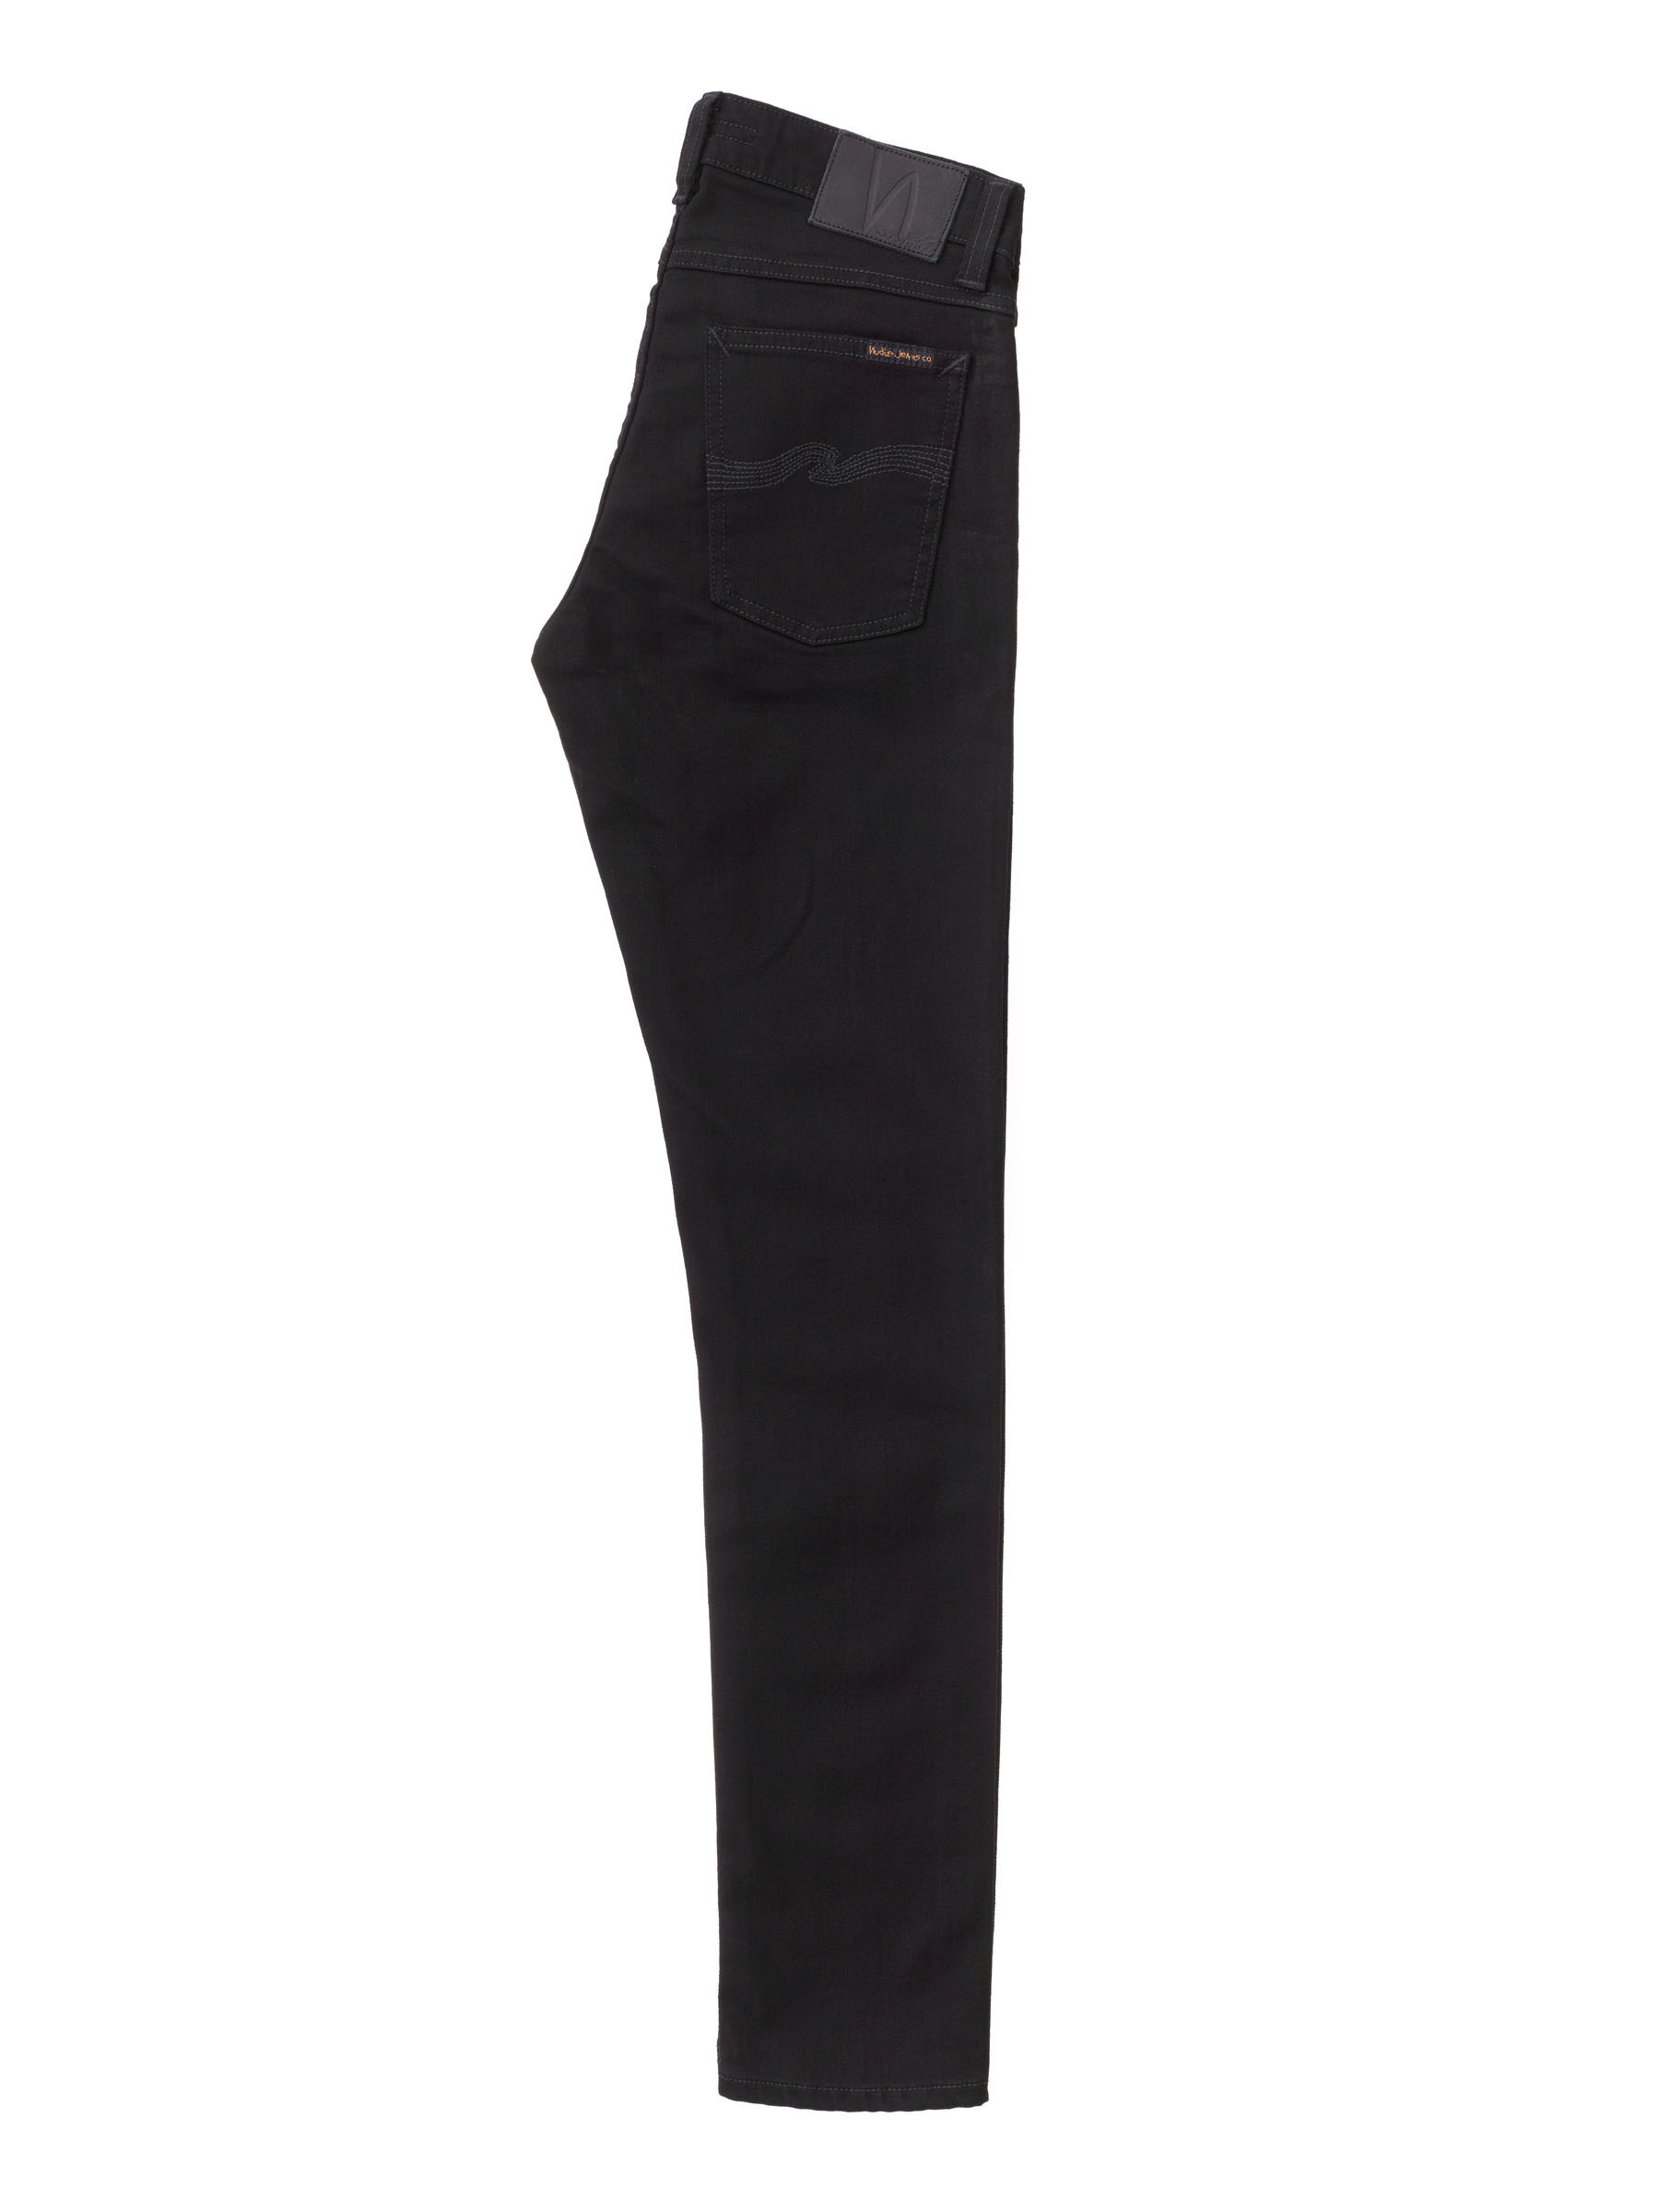 Nudie Jeans - TIGHT TERRY - Ever Black